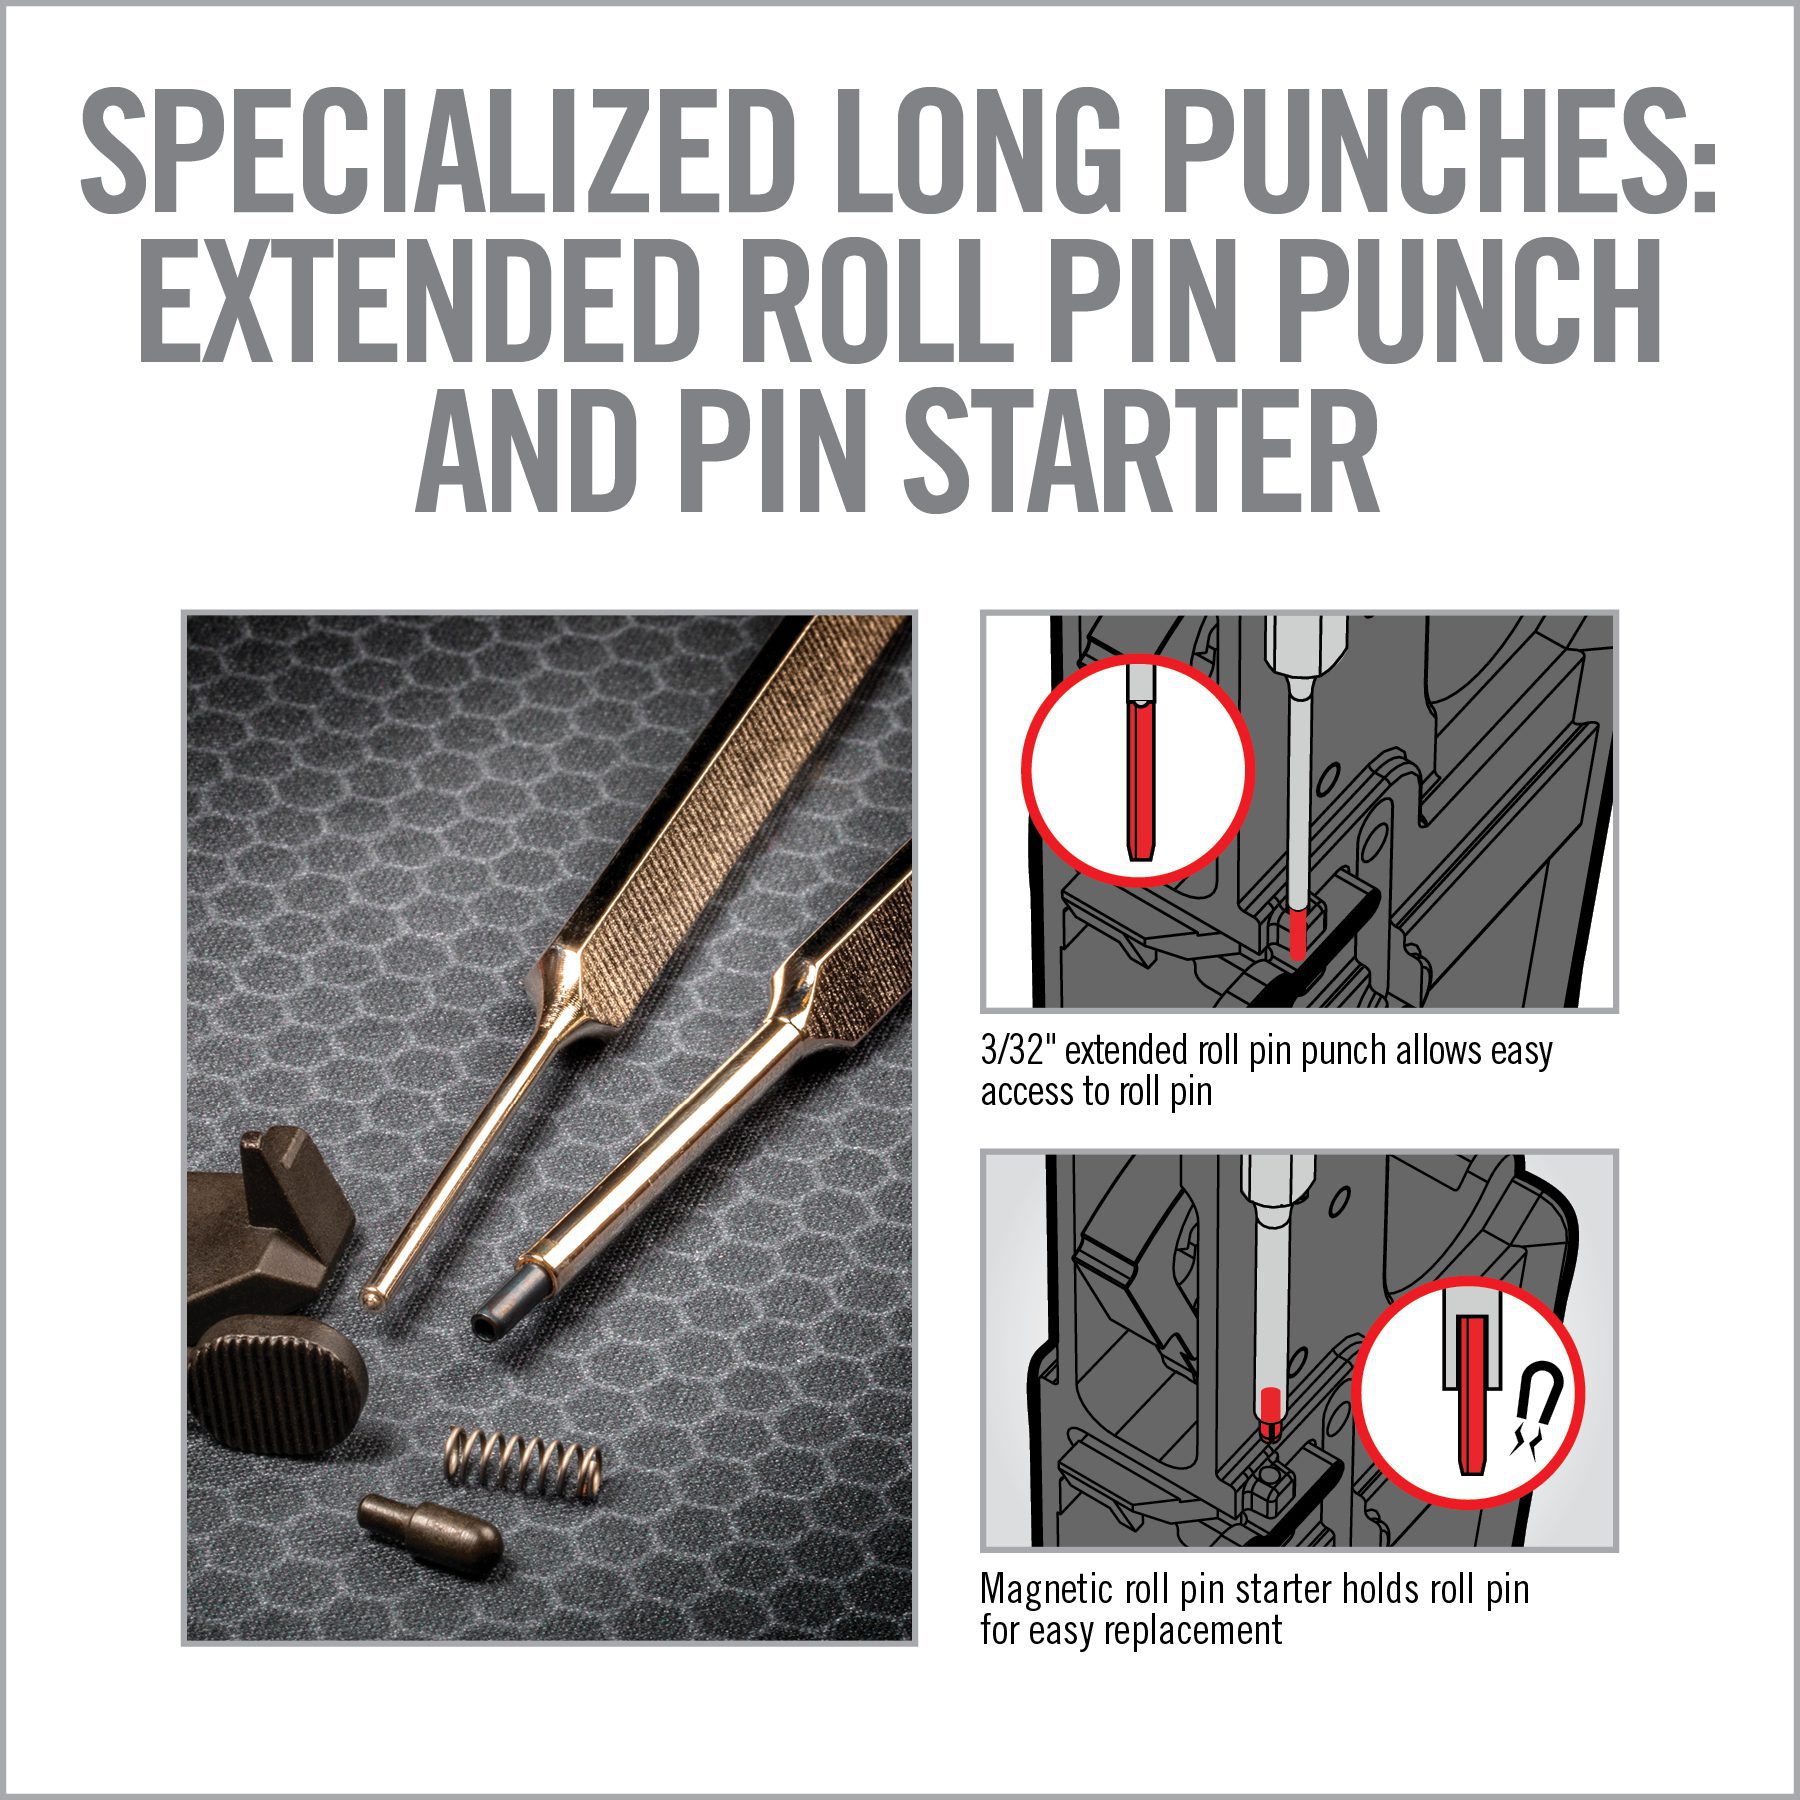 instructions on how to use the pin puncher